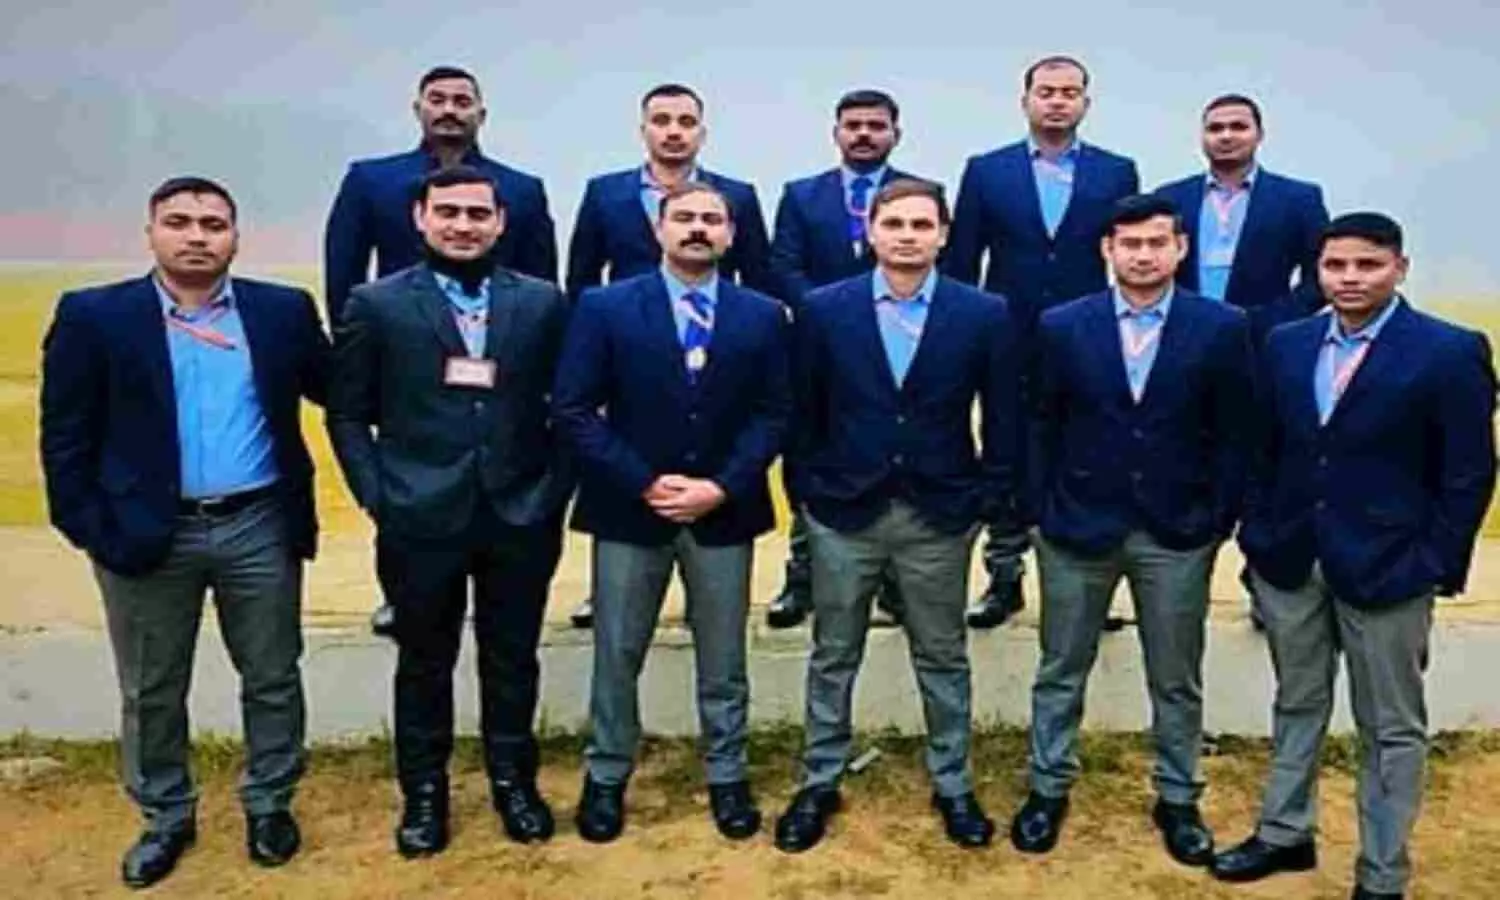 UP Police officers dress code